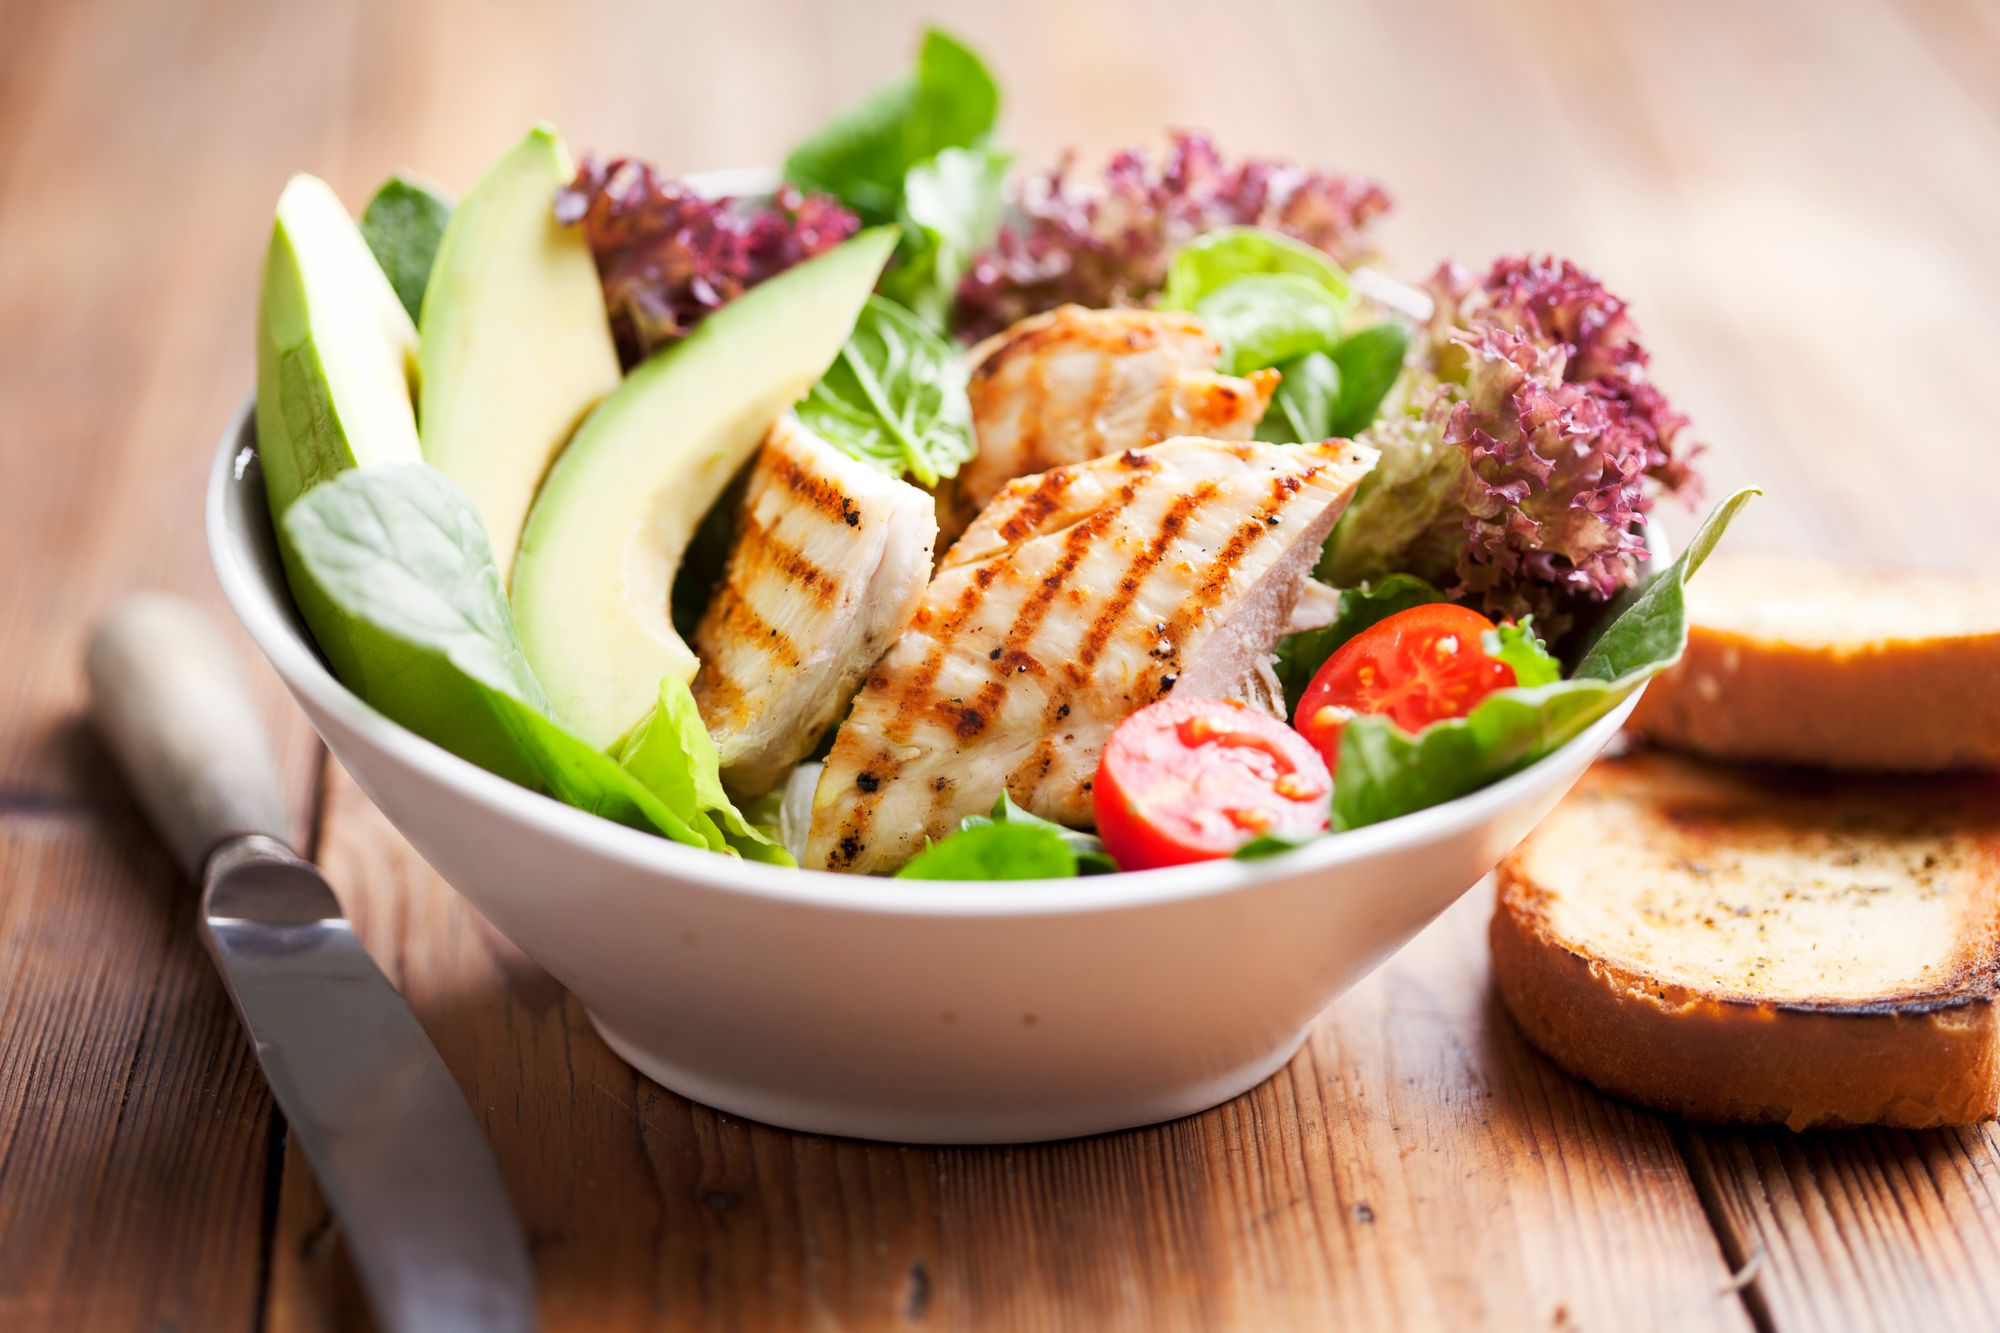 Classic Chicken Breast and Avo Salad